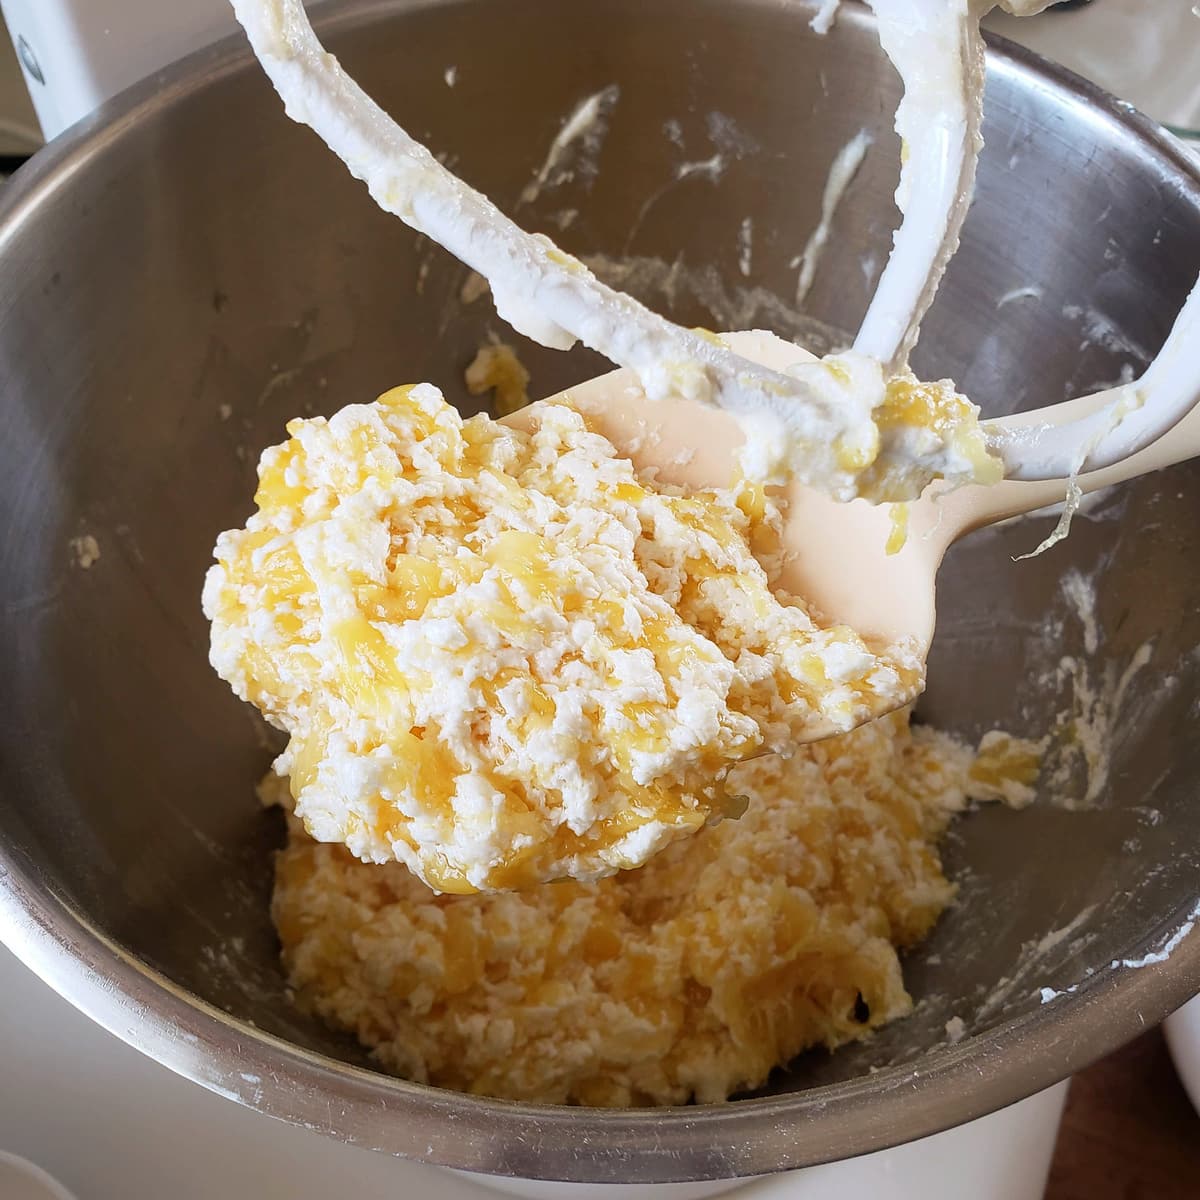 Curdled mixture with pineapple, on a white spoon in a silver mixer bowl